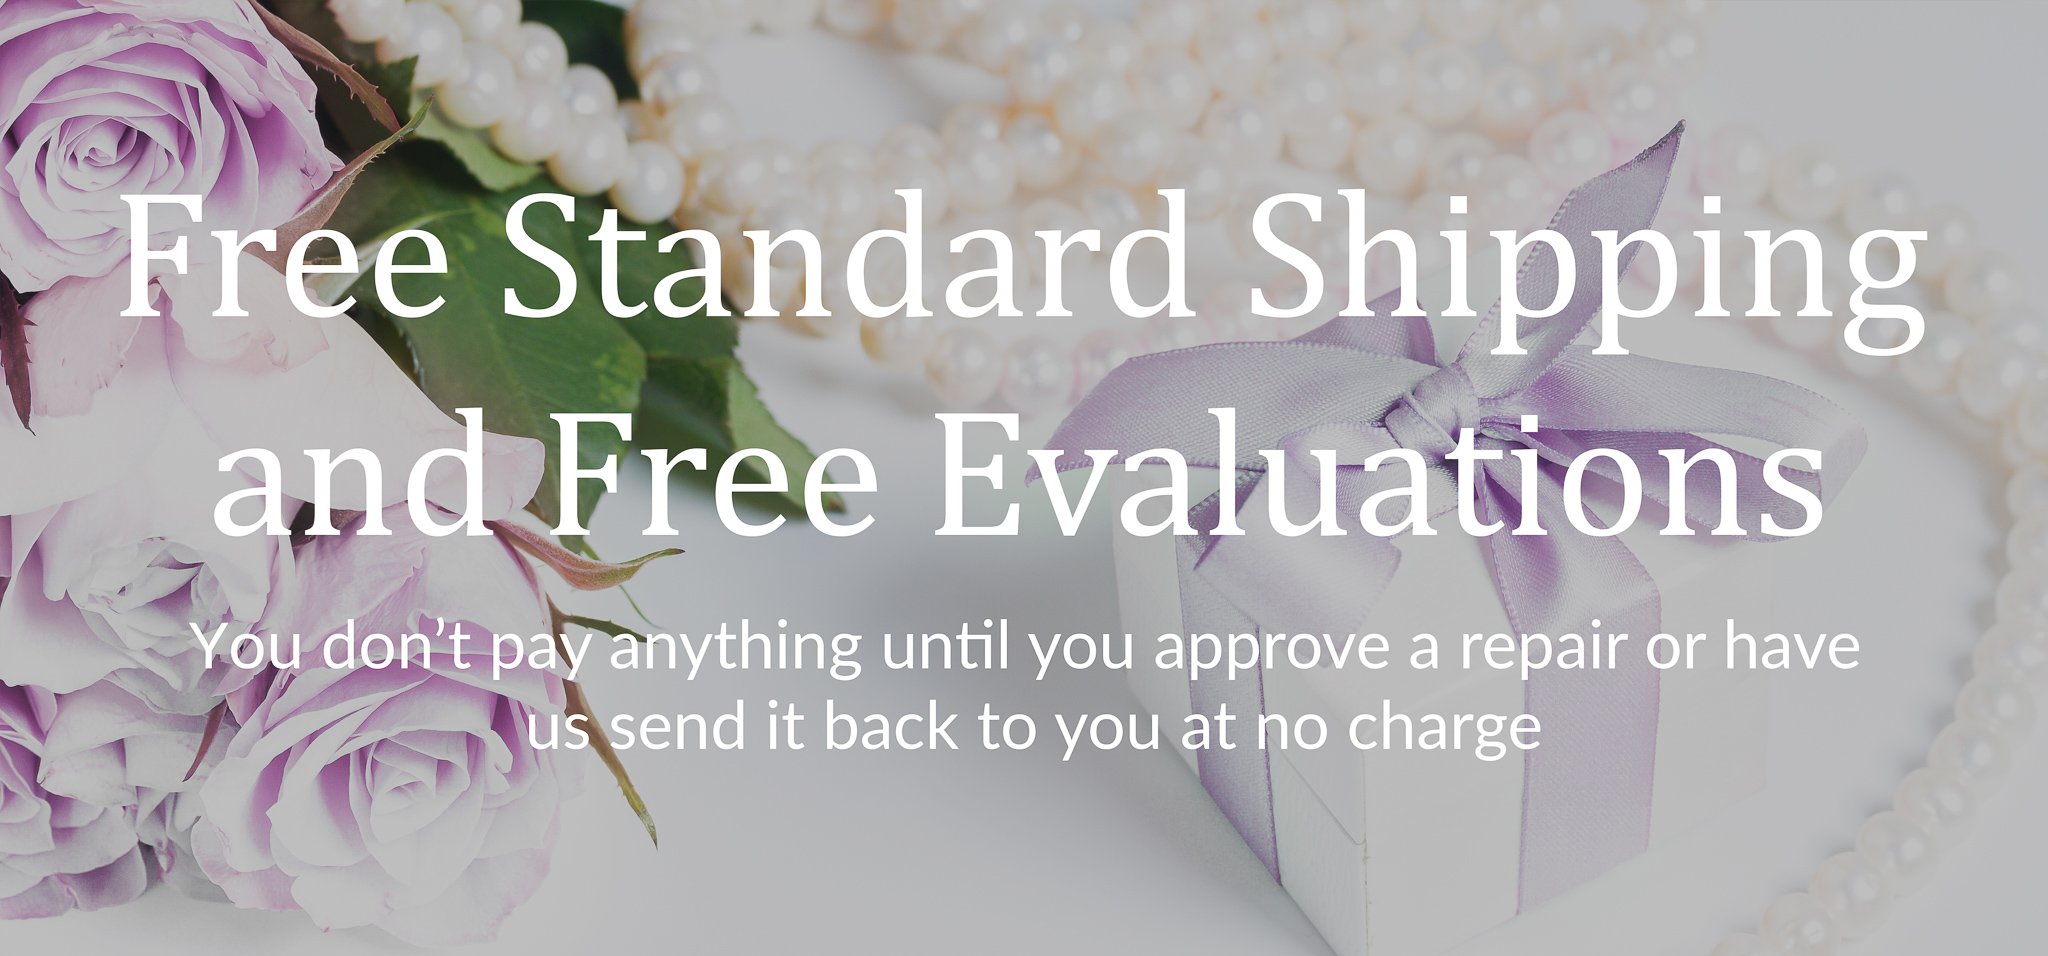 Banner Showing Free Evaluations & Shipping for Online Ring Repair by Mail